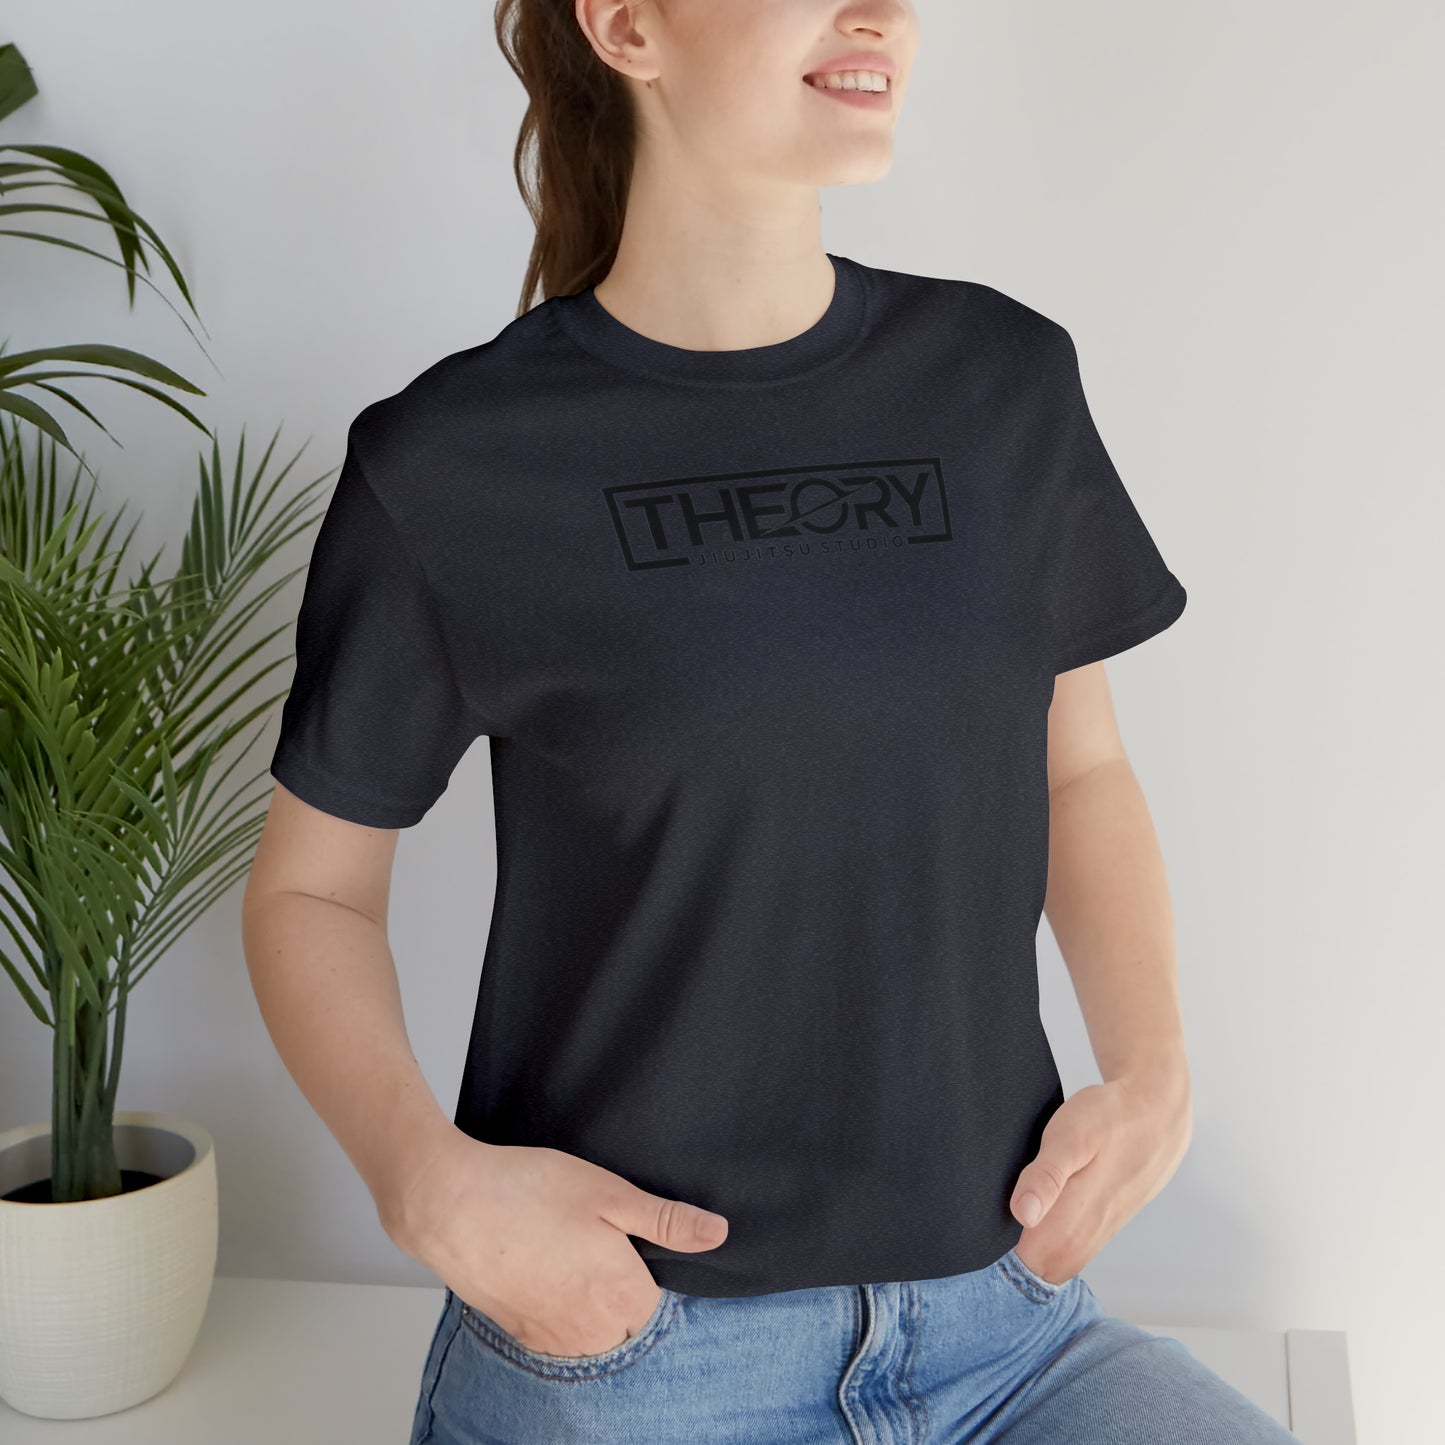 "Structured THEØRY" Unisex Tee